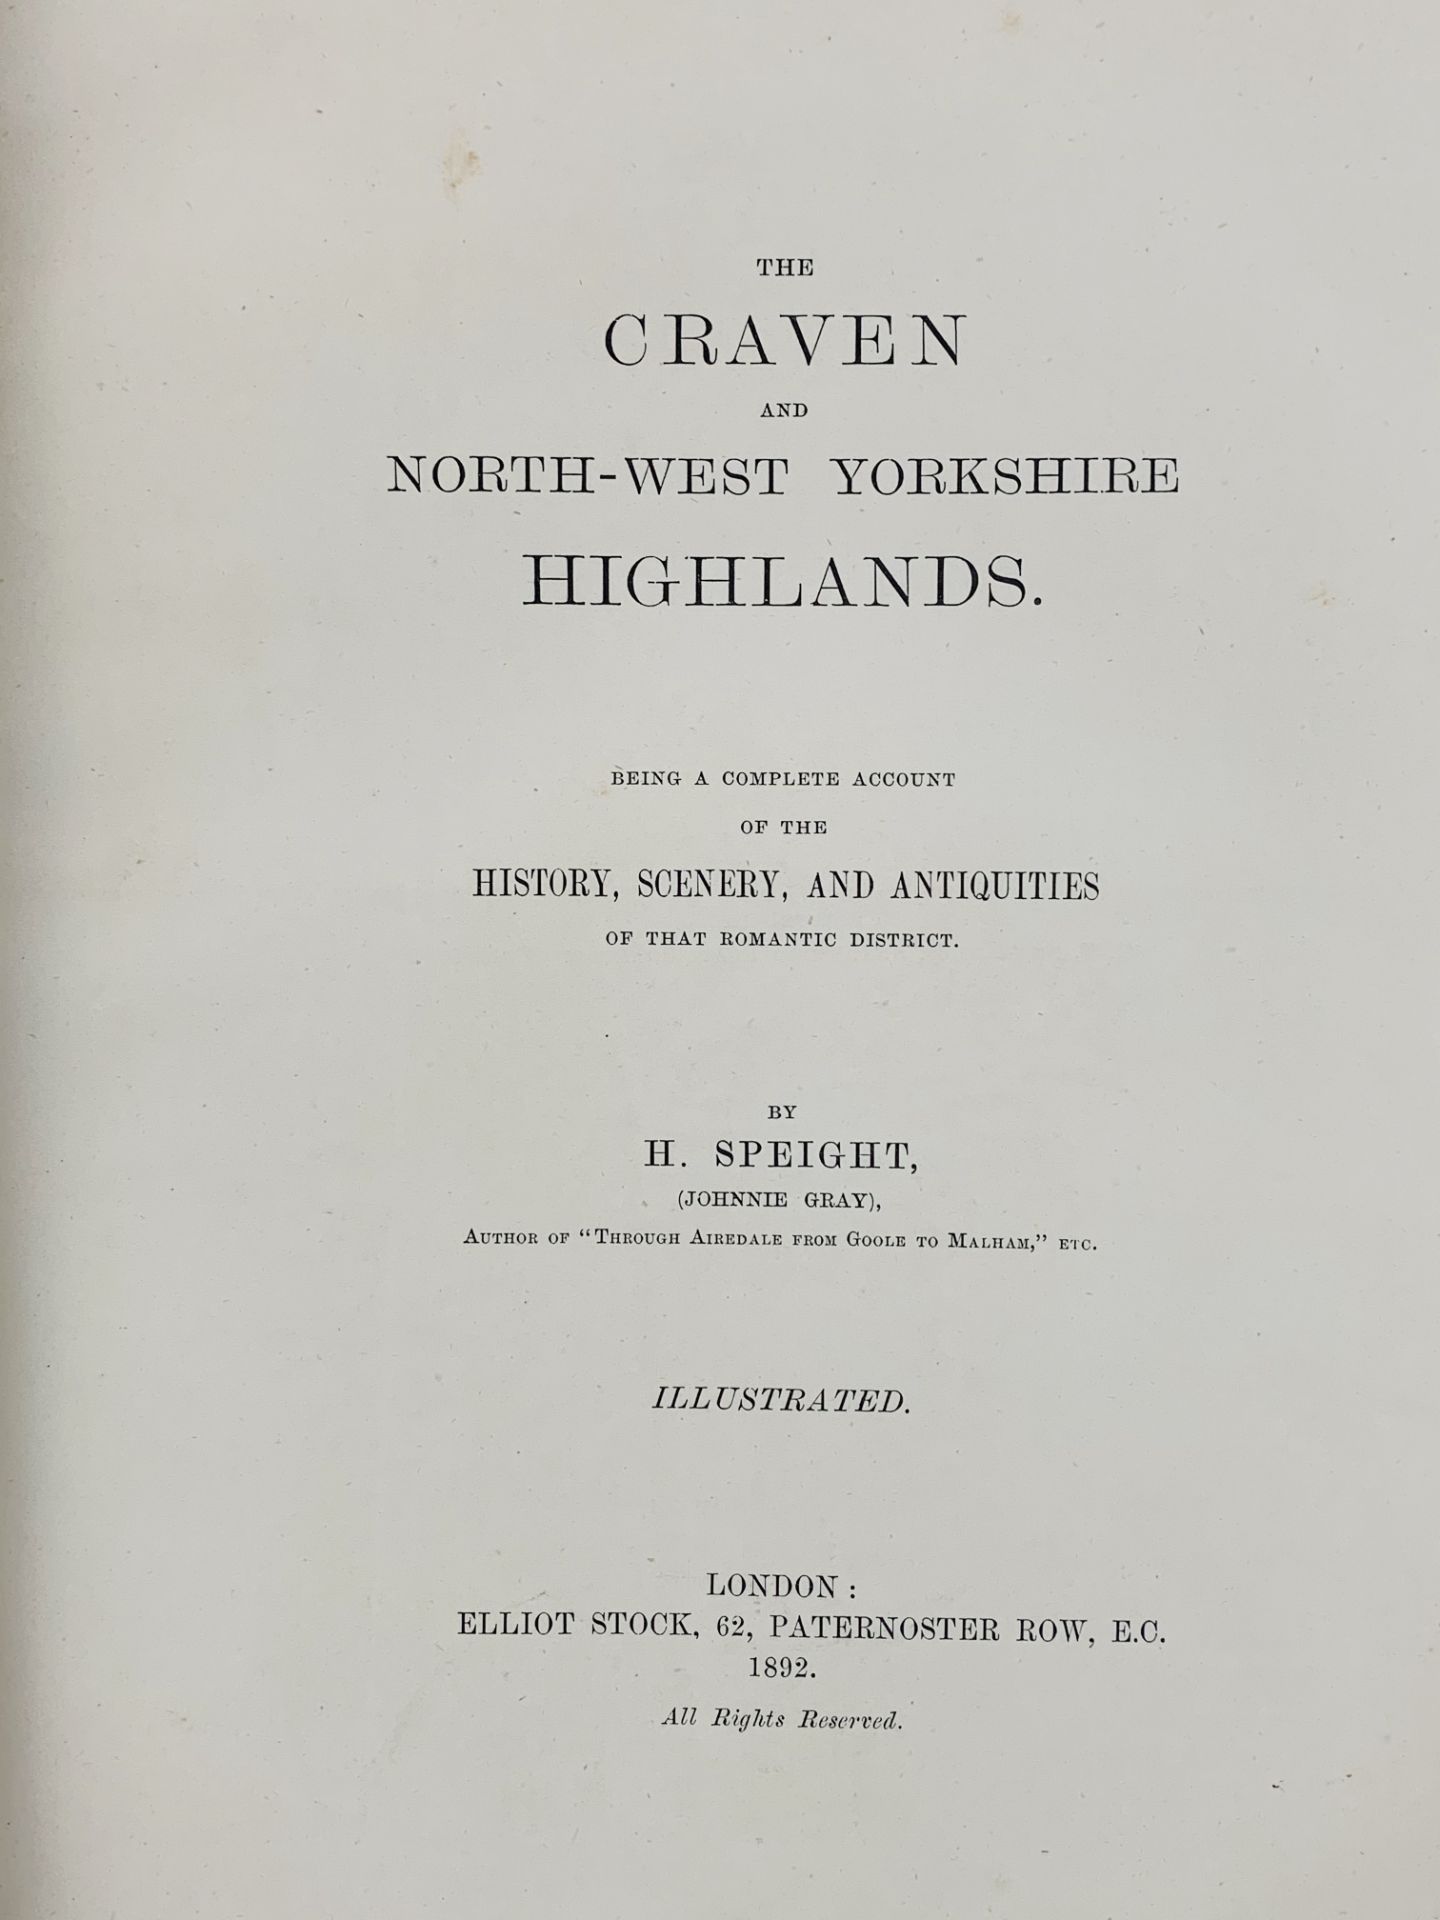 The Craven and North West Yorkshire Highlands by H Speight 1892 - Image 2 of 3